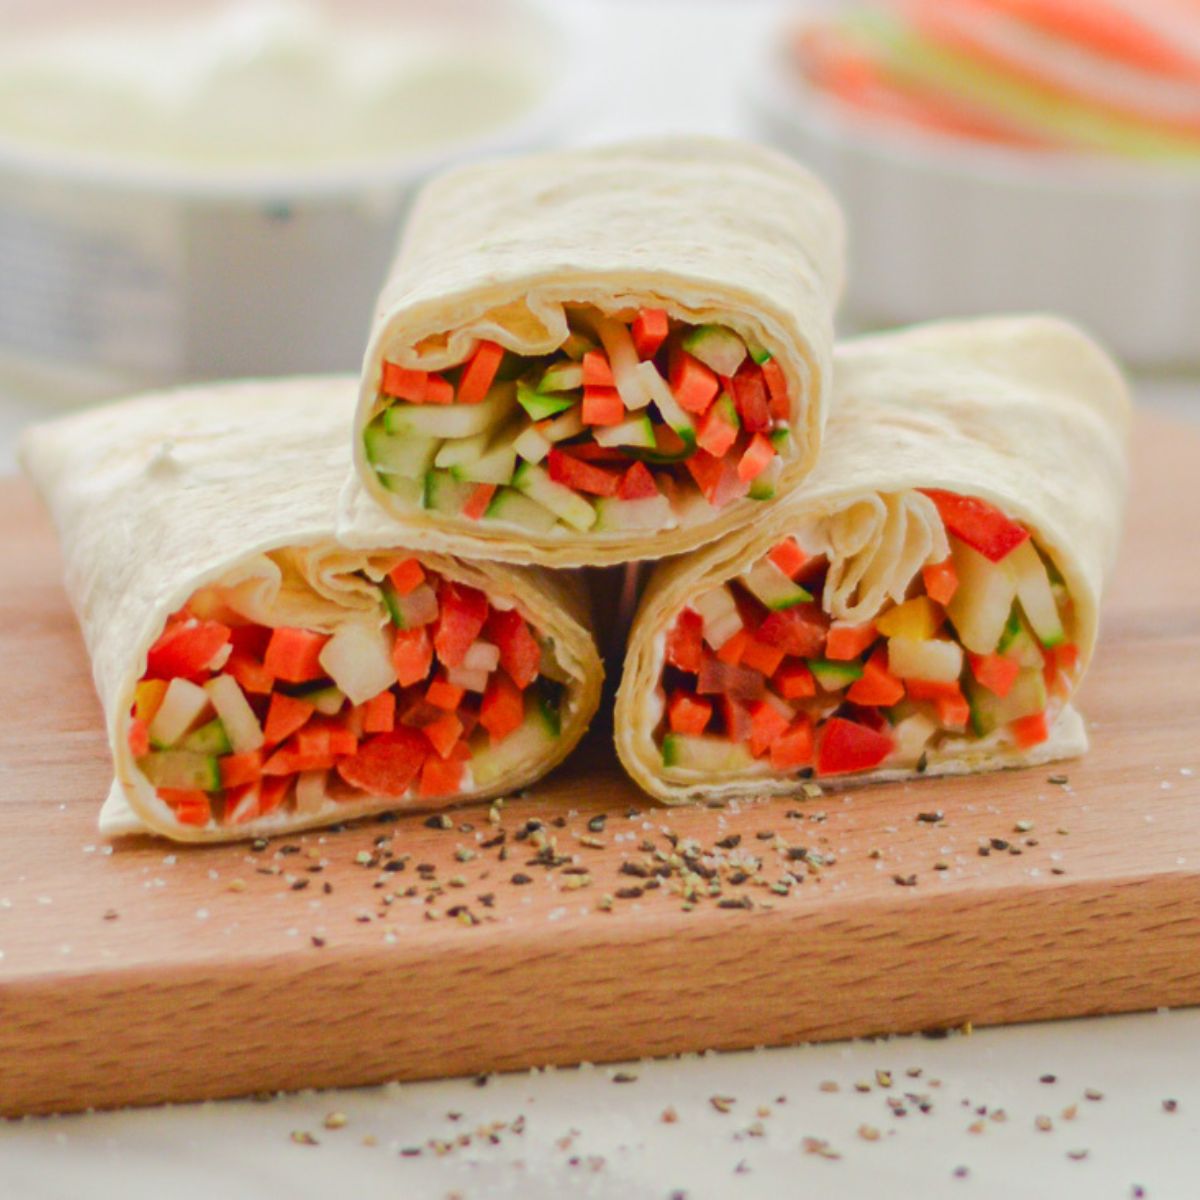 three veggie wraps placed on a wooden board with a cheese tub and a bowl of sliced vegetables behind it.